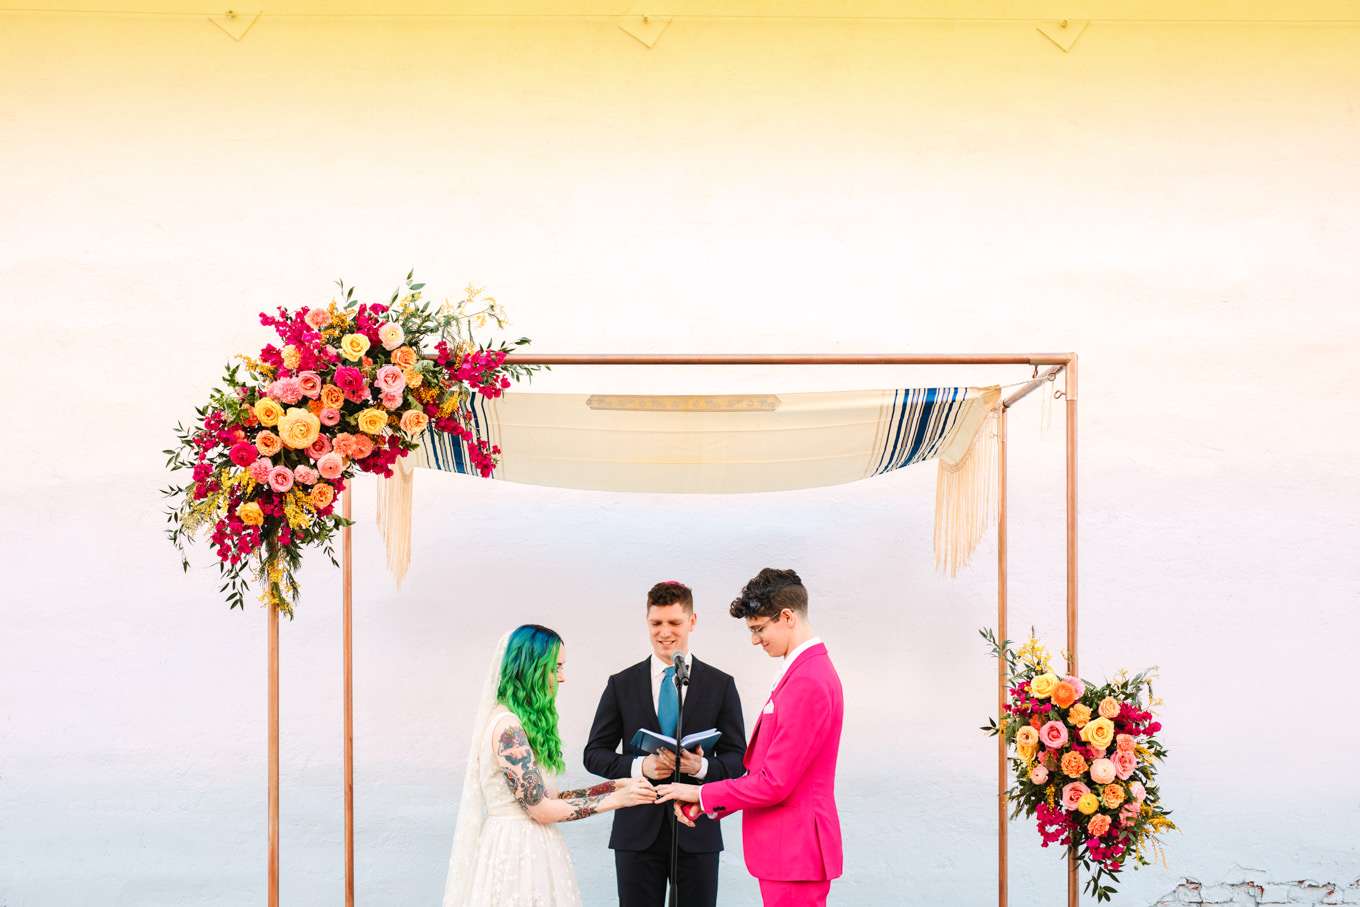 Bride with green hair putting wedding ring on groom with hot pink suit | Colorful wedding at The Unique Space Los Angeles published in The Knot Magazine | Fresh and colorful photography for fun-loving couples in Southern California | #colorfulwedding #losangeleswedding #weddingphotography #uniquespace Source: Mary Costa Photography | Los Angeles